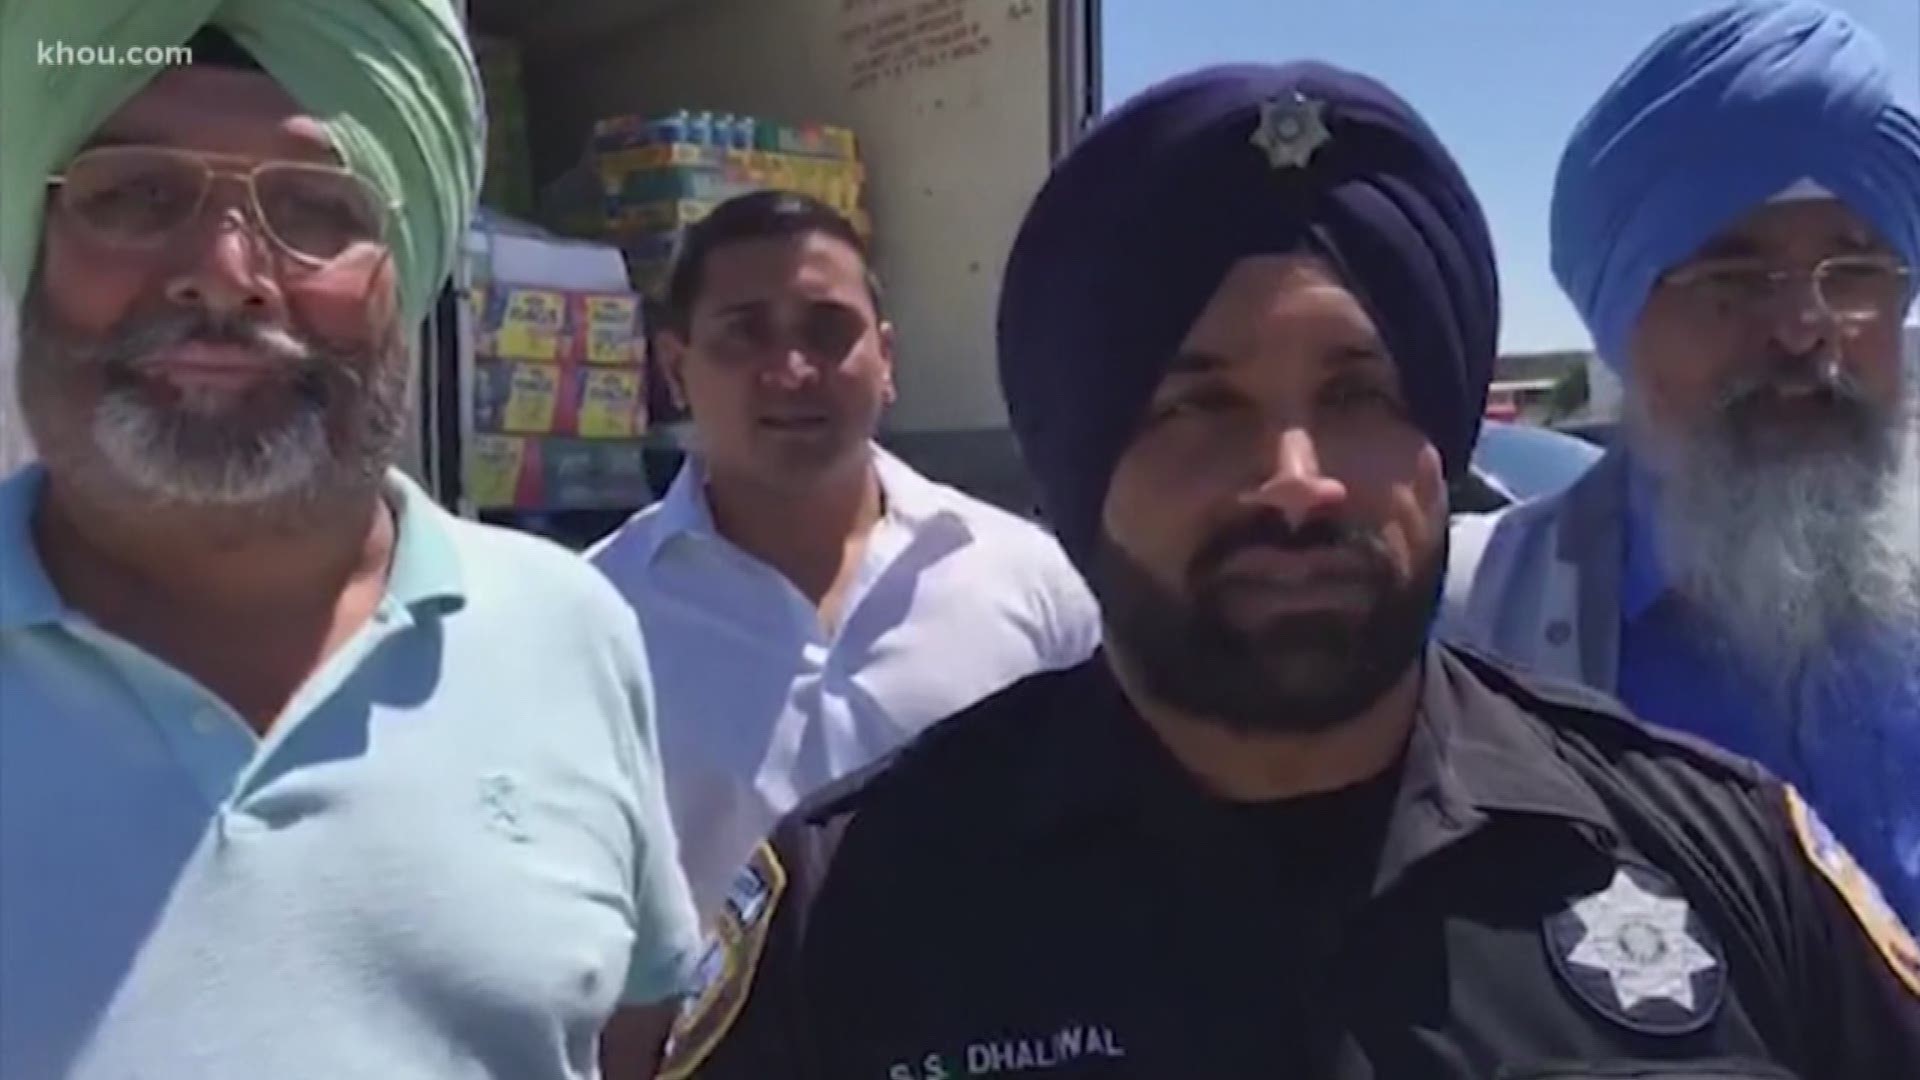 Houston Police have changed their uniform policy to allow Sikh officers to wear articles of faith.